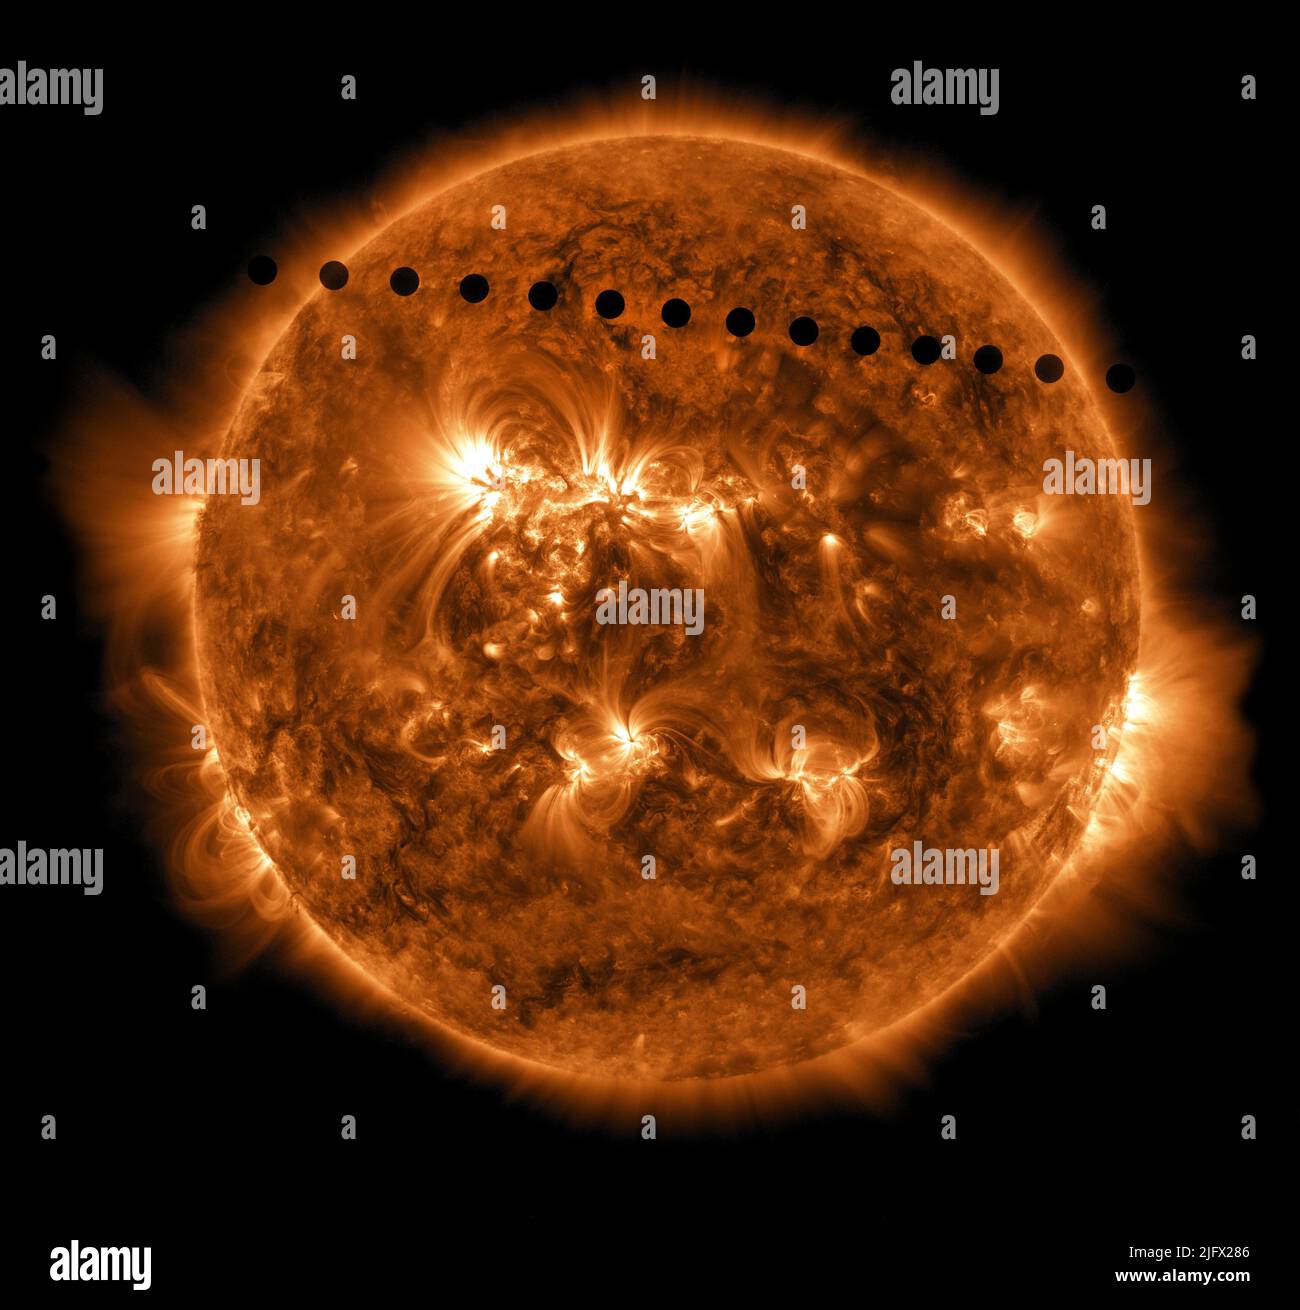 The transit of Venus across the face of the sun. This rarely observed event happens in pairs eight years apart that are separated from each other by 105 or 121 years. June 5, 2012, The previous transit was in 2004 and the next will not happen until 2117. This time-lapse image shows Venus as it passes across the disk of the Sun, this process took about six hours.   An optimised and digitally enhanced version of an NASA image / credit NASA / Solar Dynamics Observatory Stock Photo